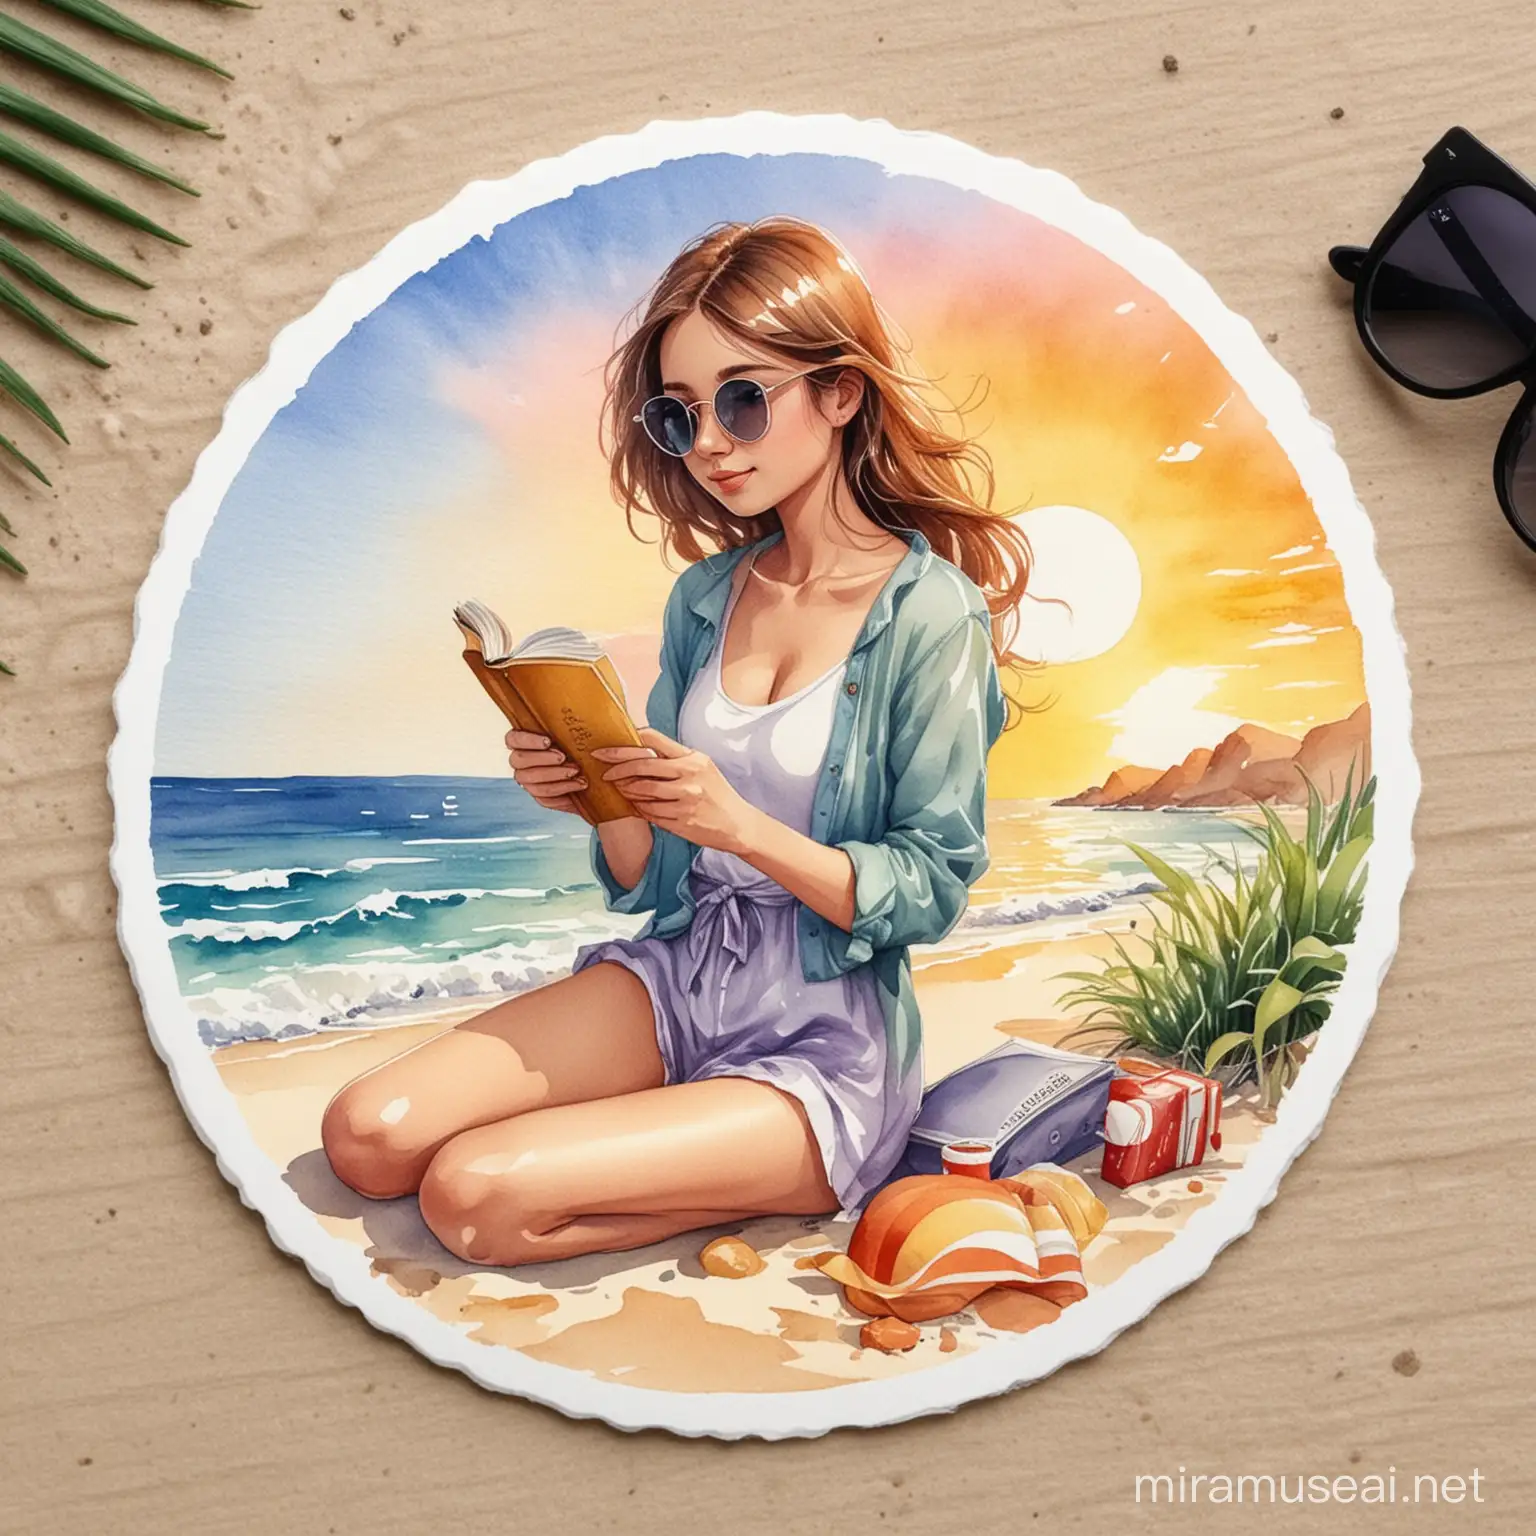 Girl on Beach Reading Book with Accessories in Watercolor Style